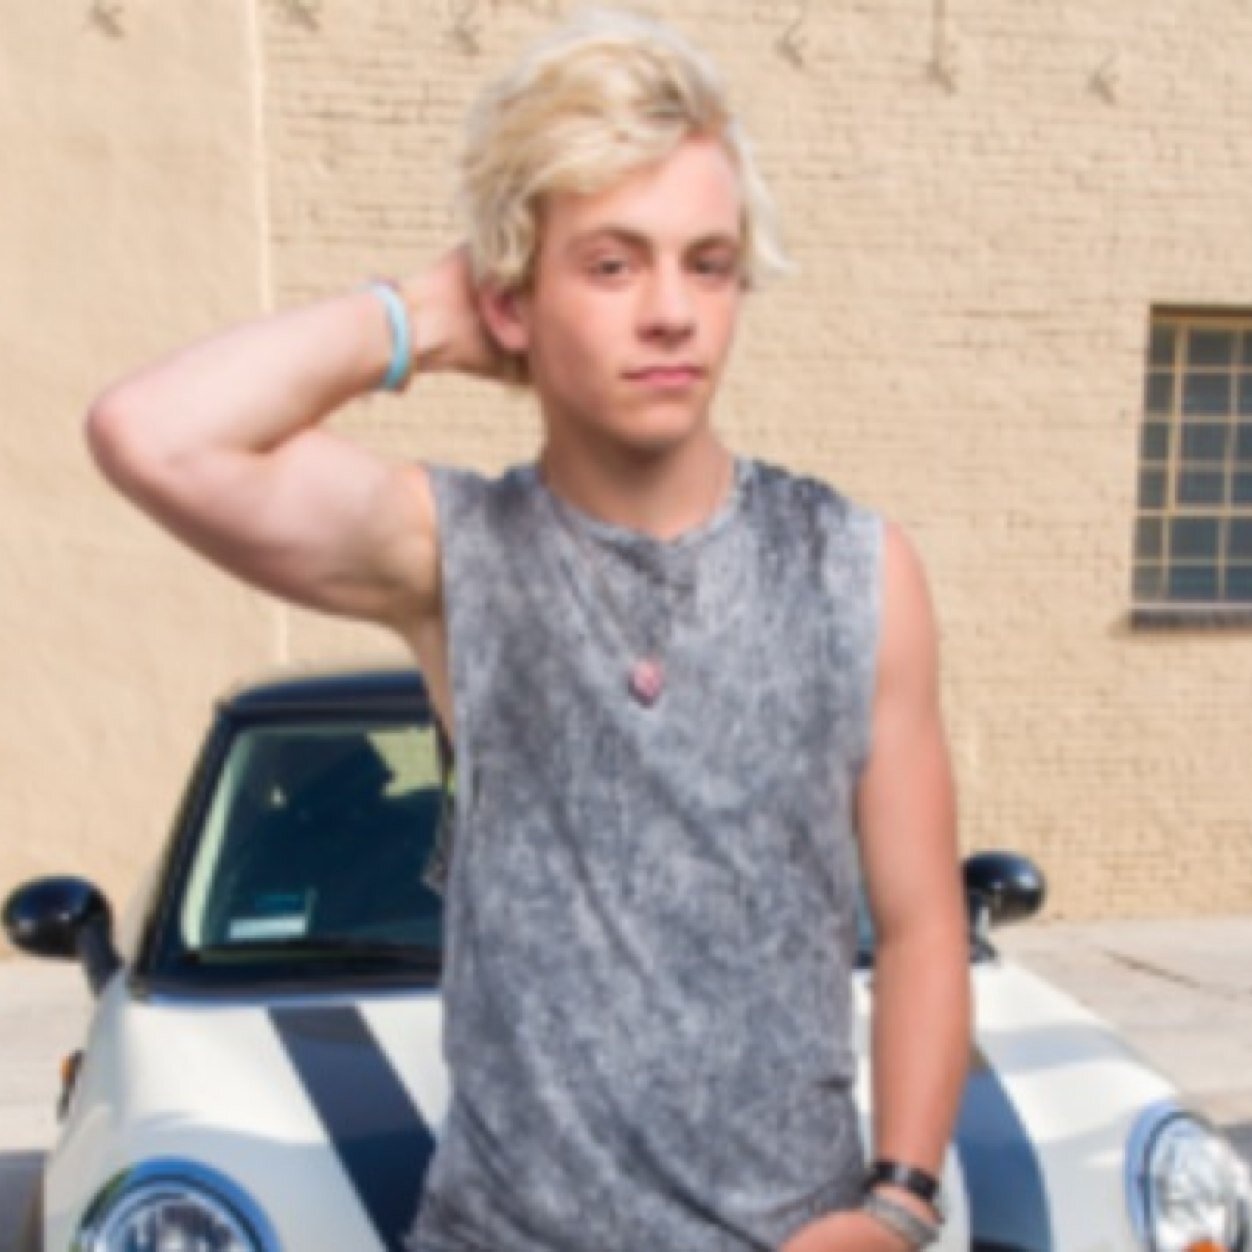 Hiiii this is a fan page and i am quite close to Ross so if you follow me i can get him to follow you! He loves his fans!